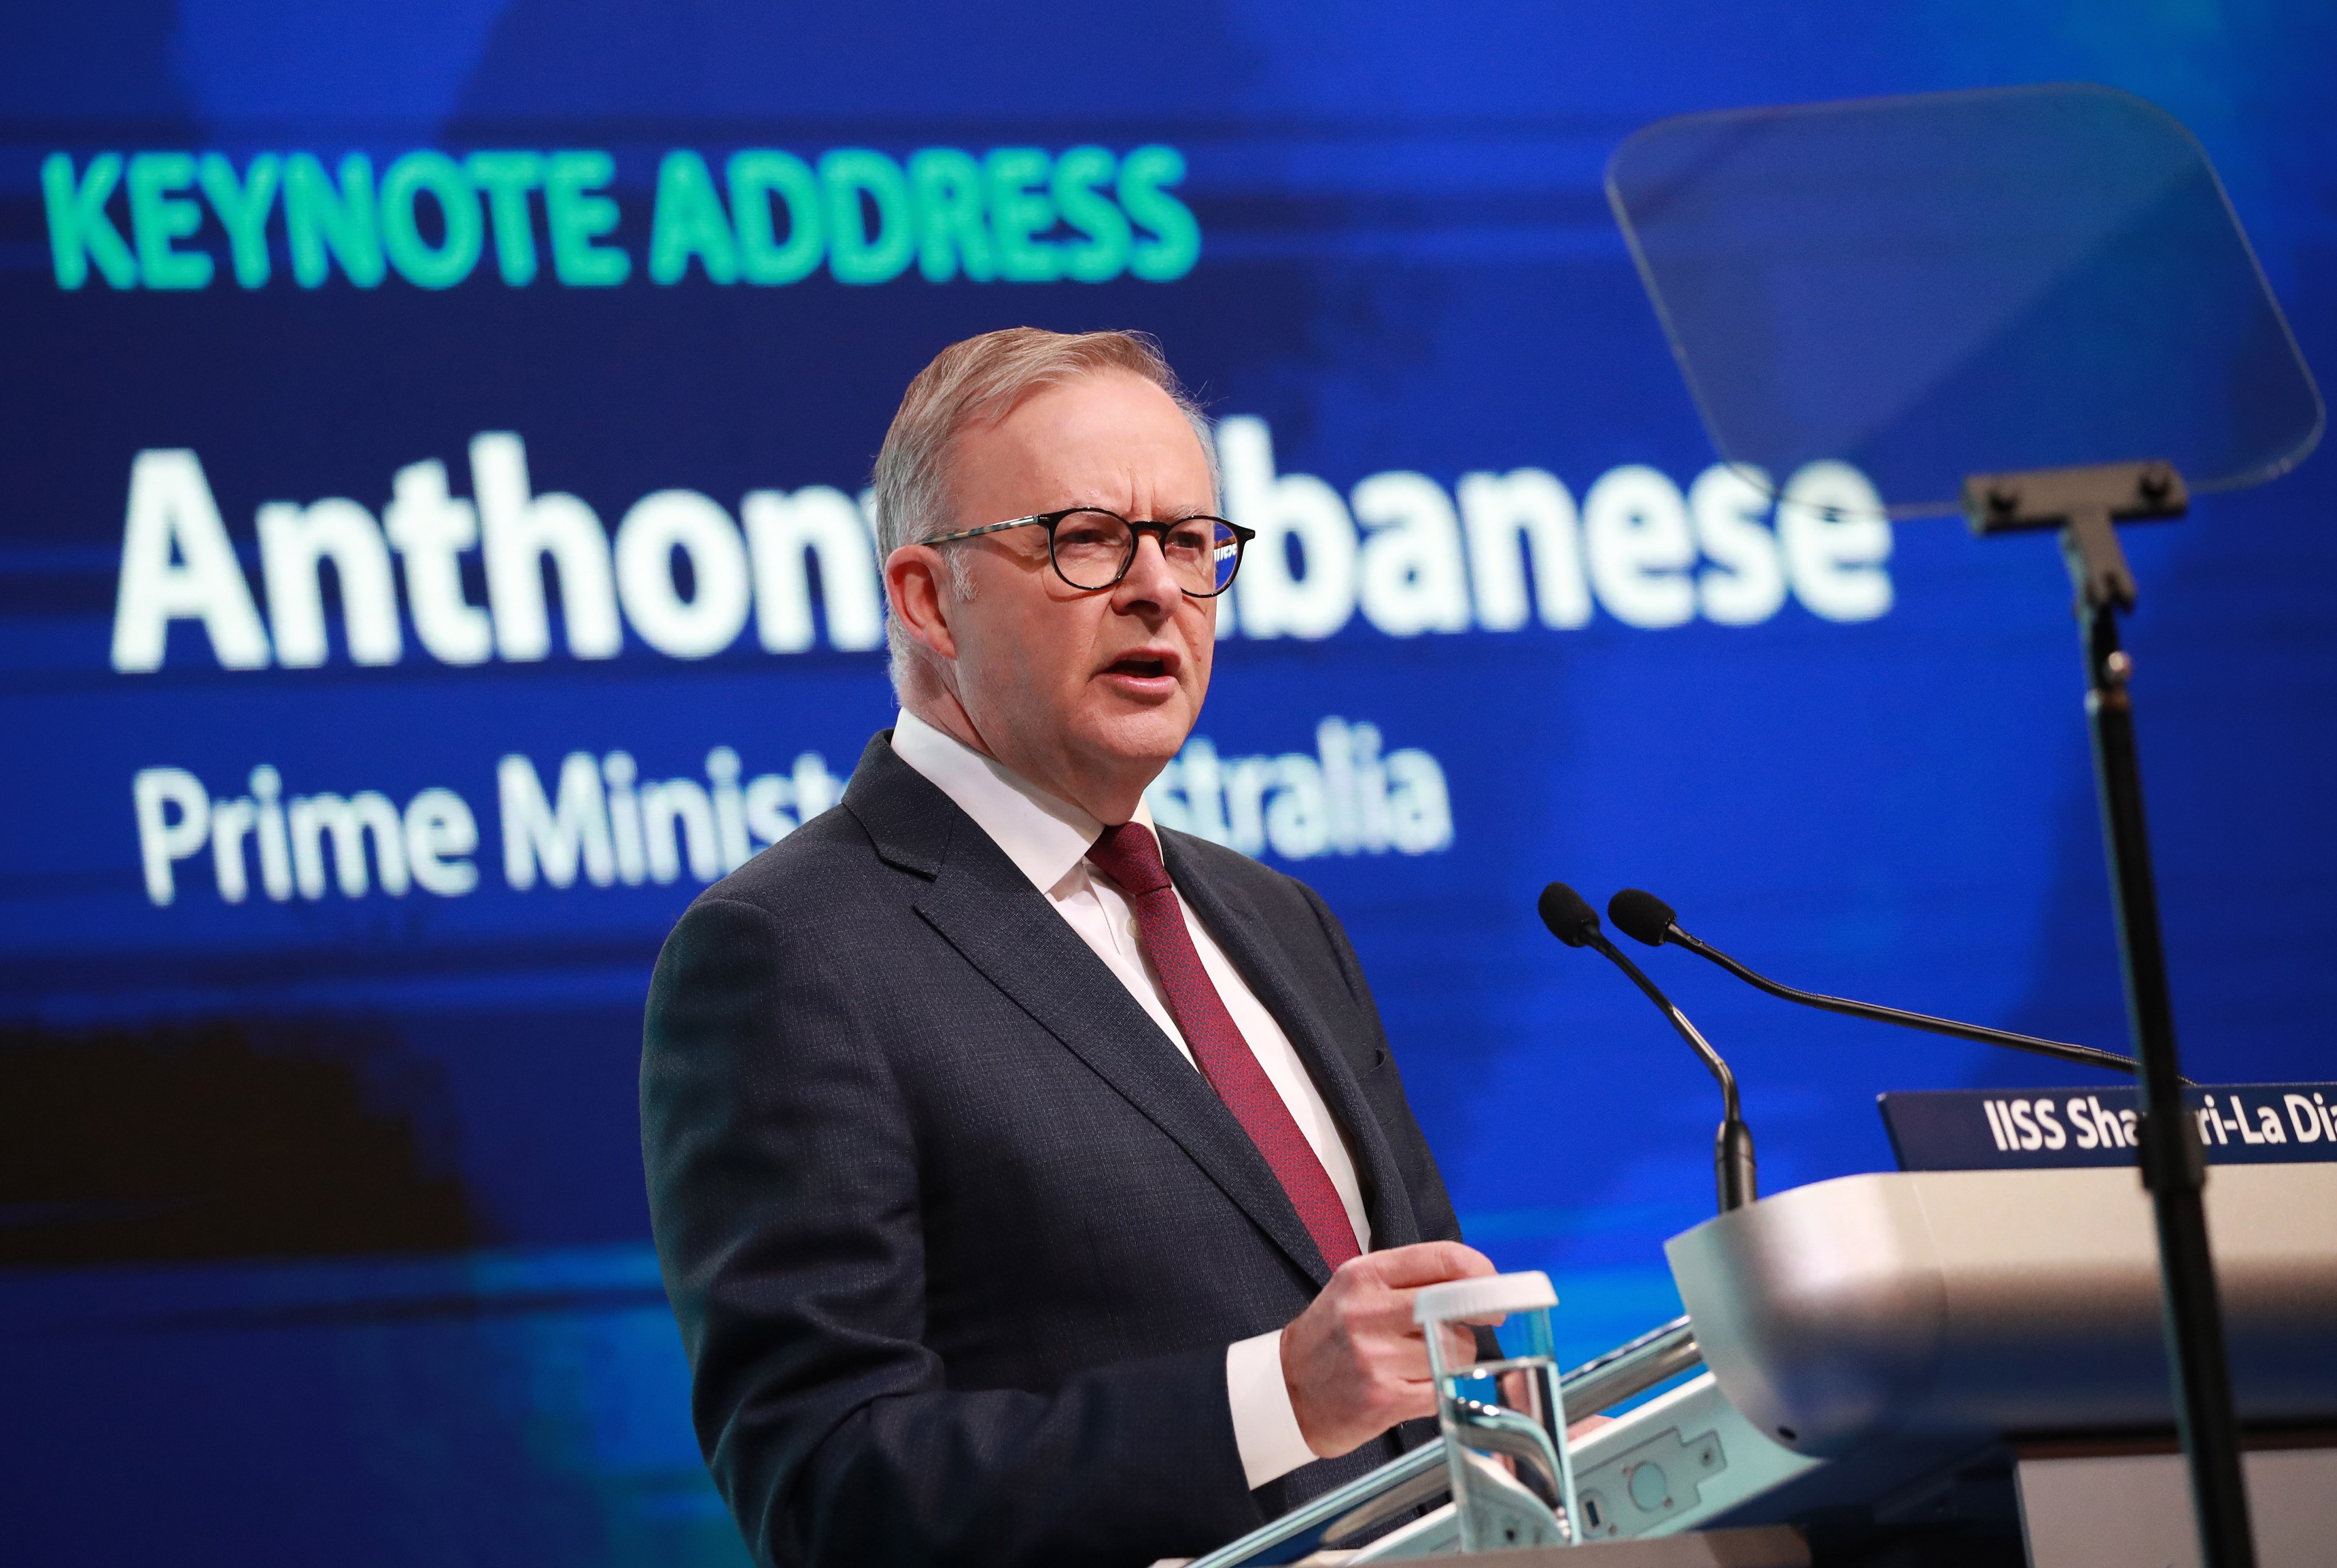 Australian PM Anthony Albanese delivers his keynote speech at the Shangri-La Dialogue. Photo: EPA-EFE